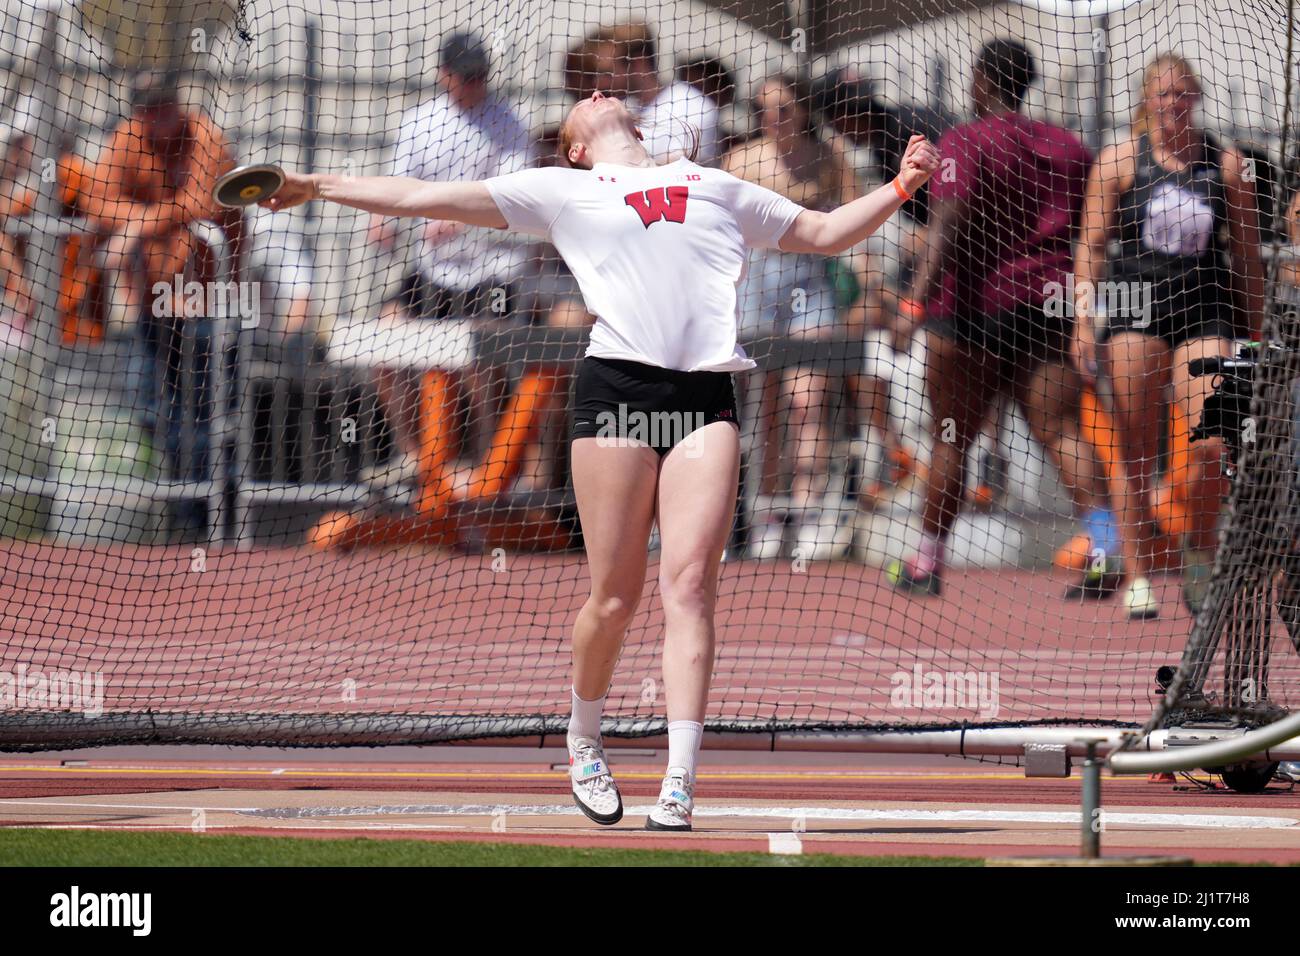 Josie Schaefer of Wisconsin places sixth in the women's discus at 174-4 (53.13m) during the 94th Clyde Littlefield Texas Relays, Saturday, Mar. 26, 20 Stock Photo